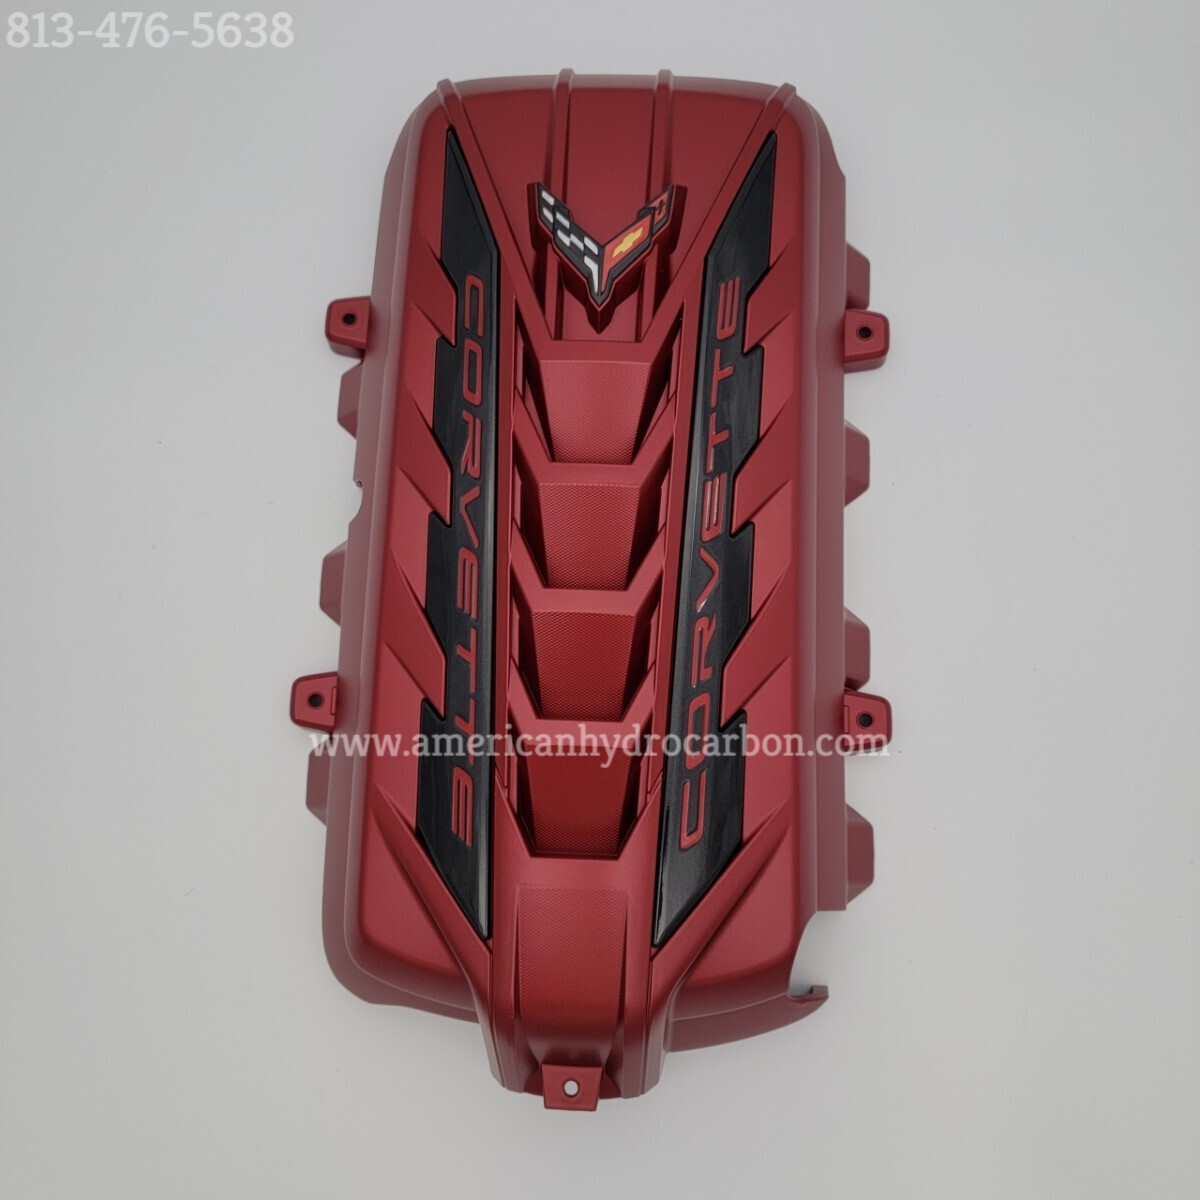 Edge Red C8 Corvette Engine Cover by American Hydrocarbon